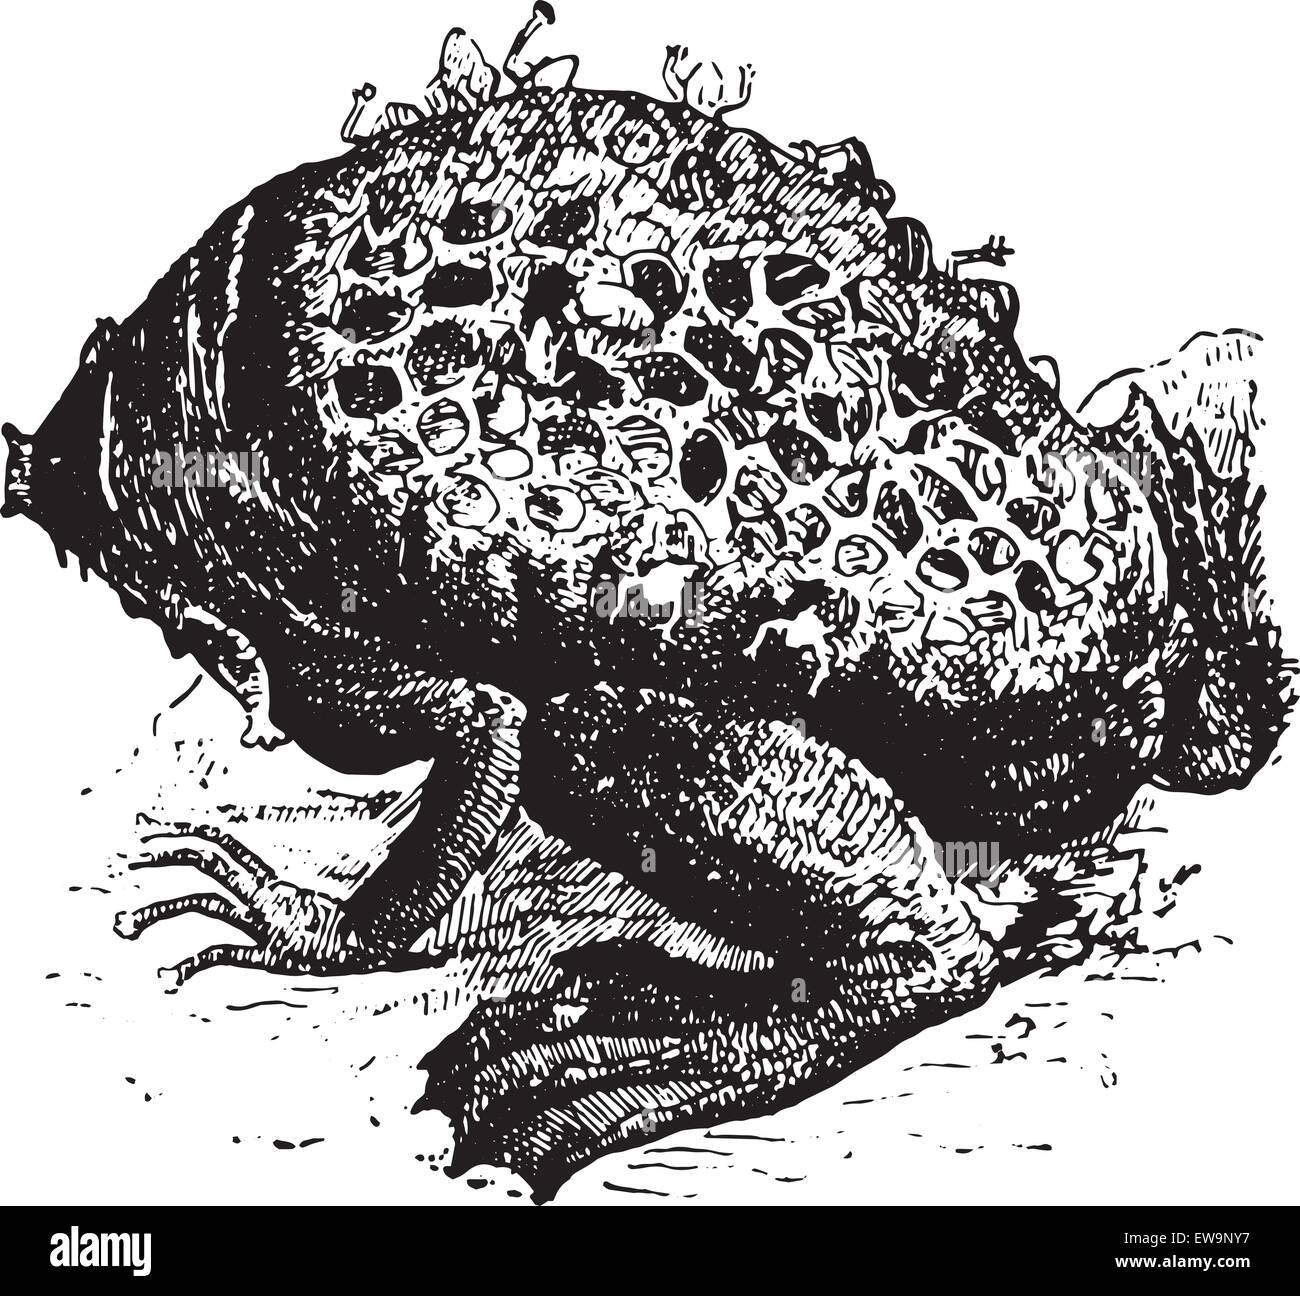 Pipa Pipa or Surinam Toad or star-fingered toad, vintage engraved illustration. Dictionary of words and things - Larive and Fleury - 1895. Stock Vector